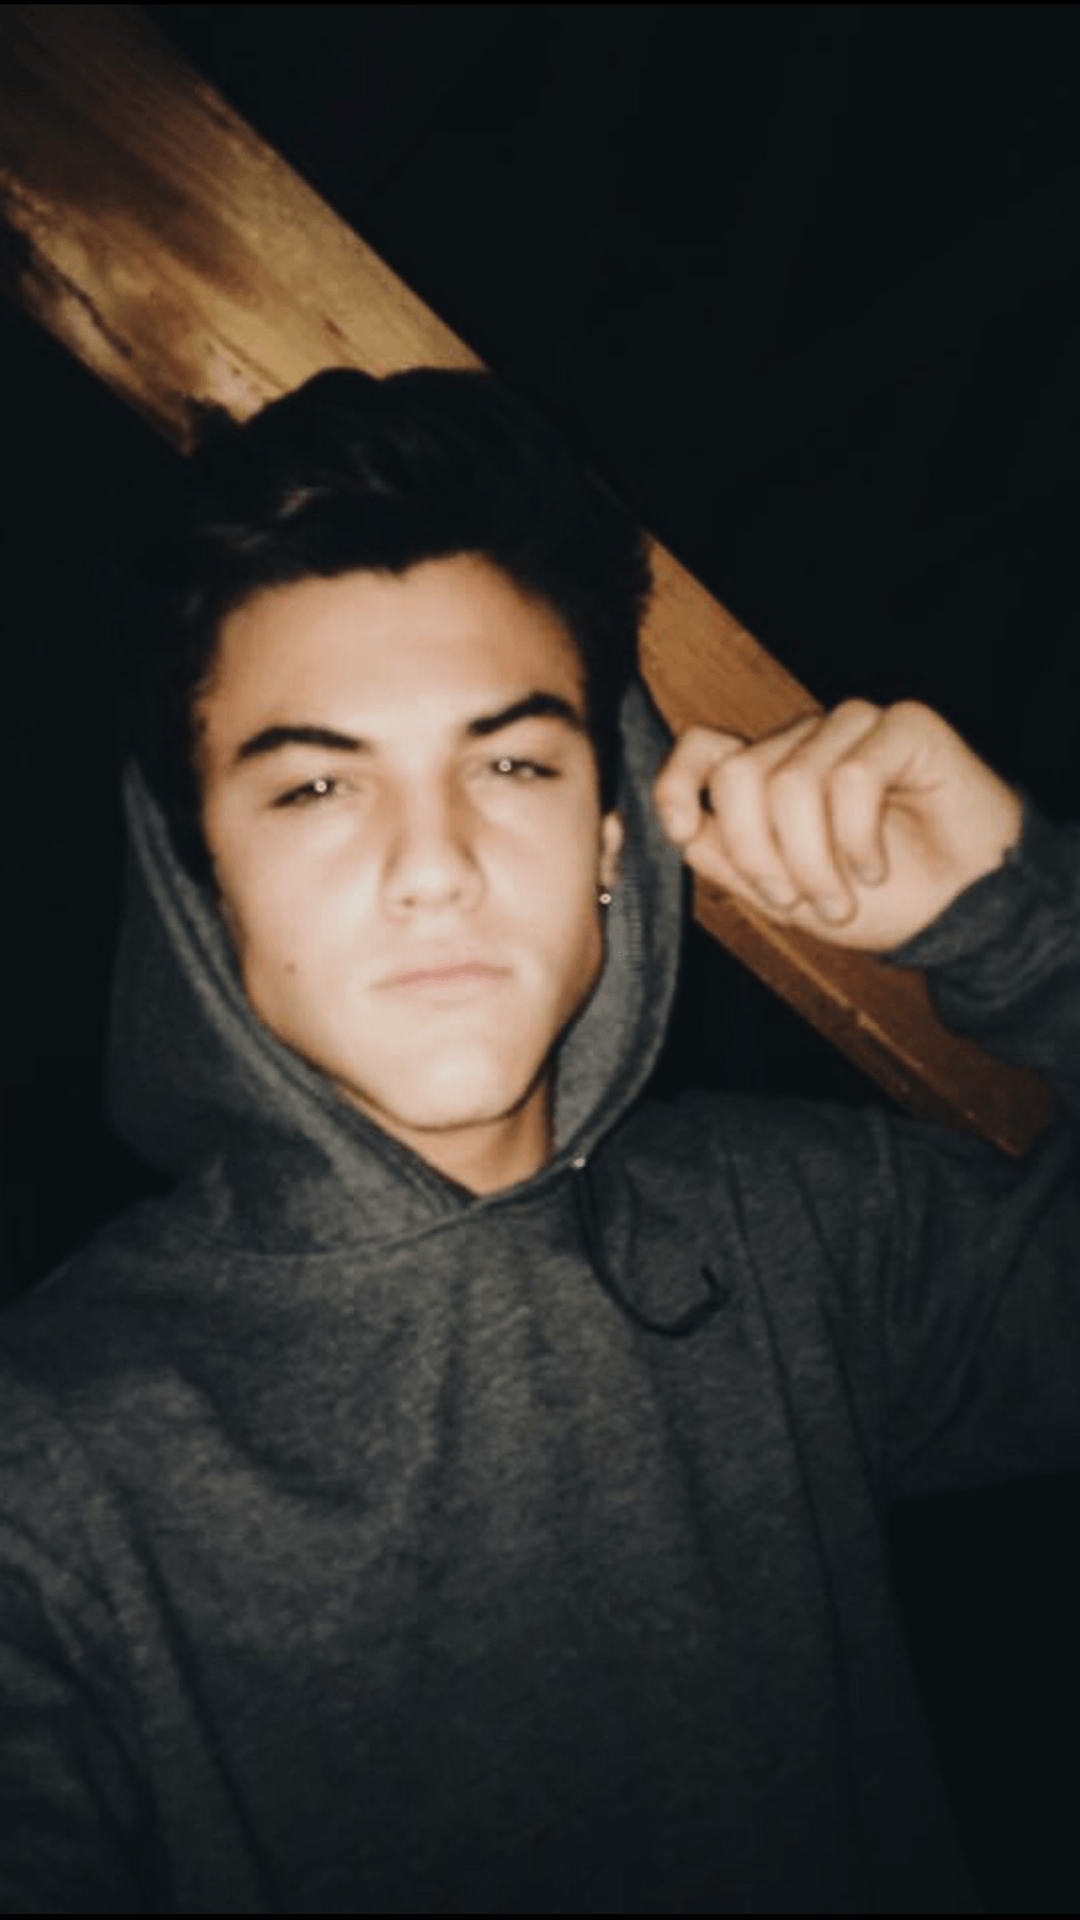 Ethan Dolan Wallpapers - Wallpaper Cave